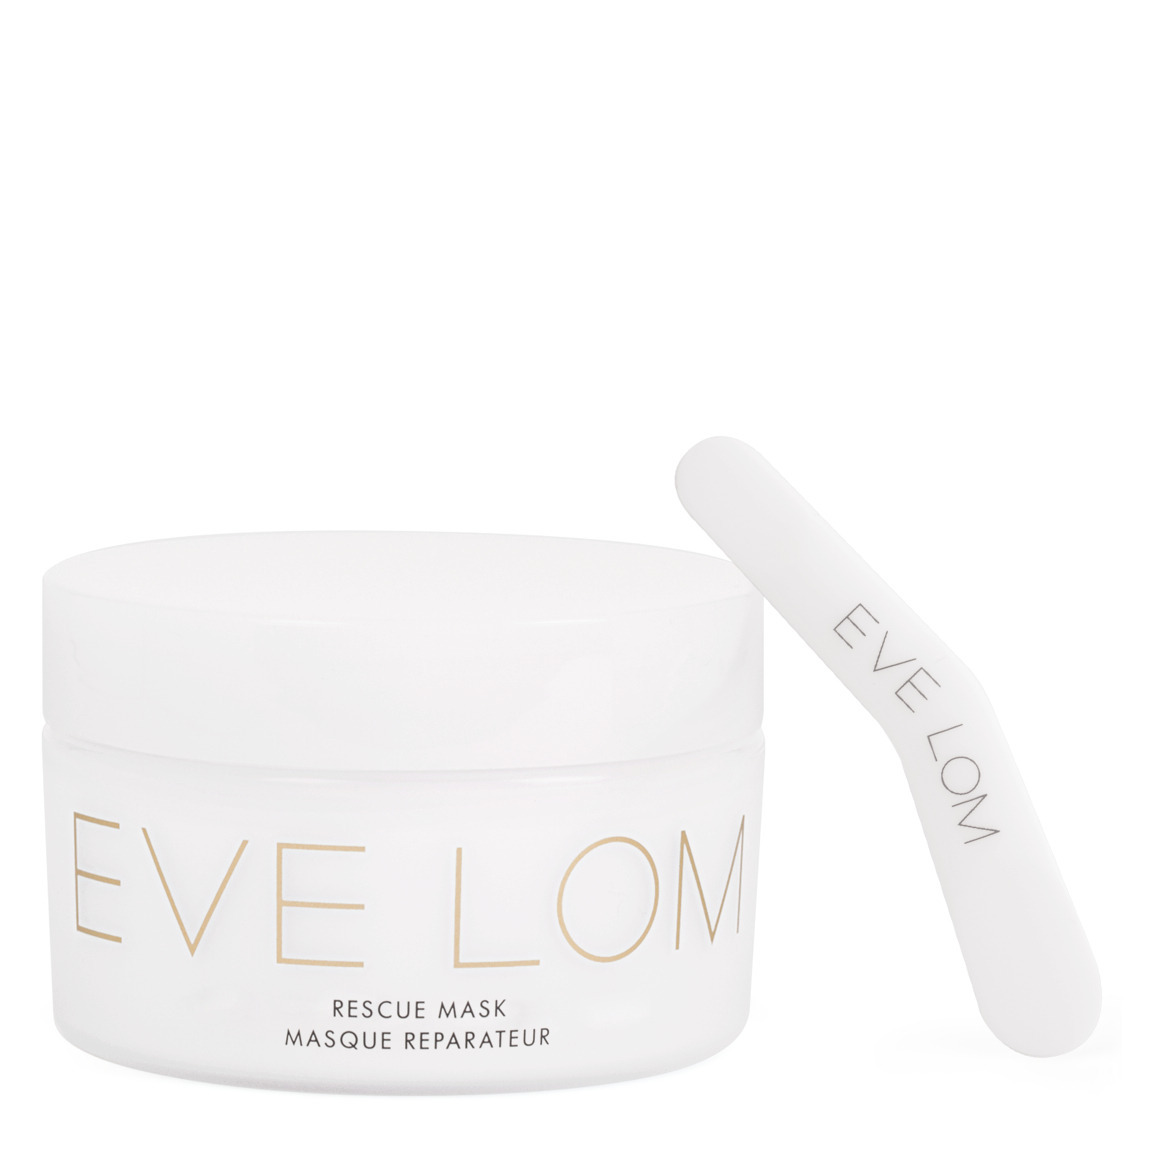 eve lom rescue mask review